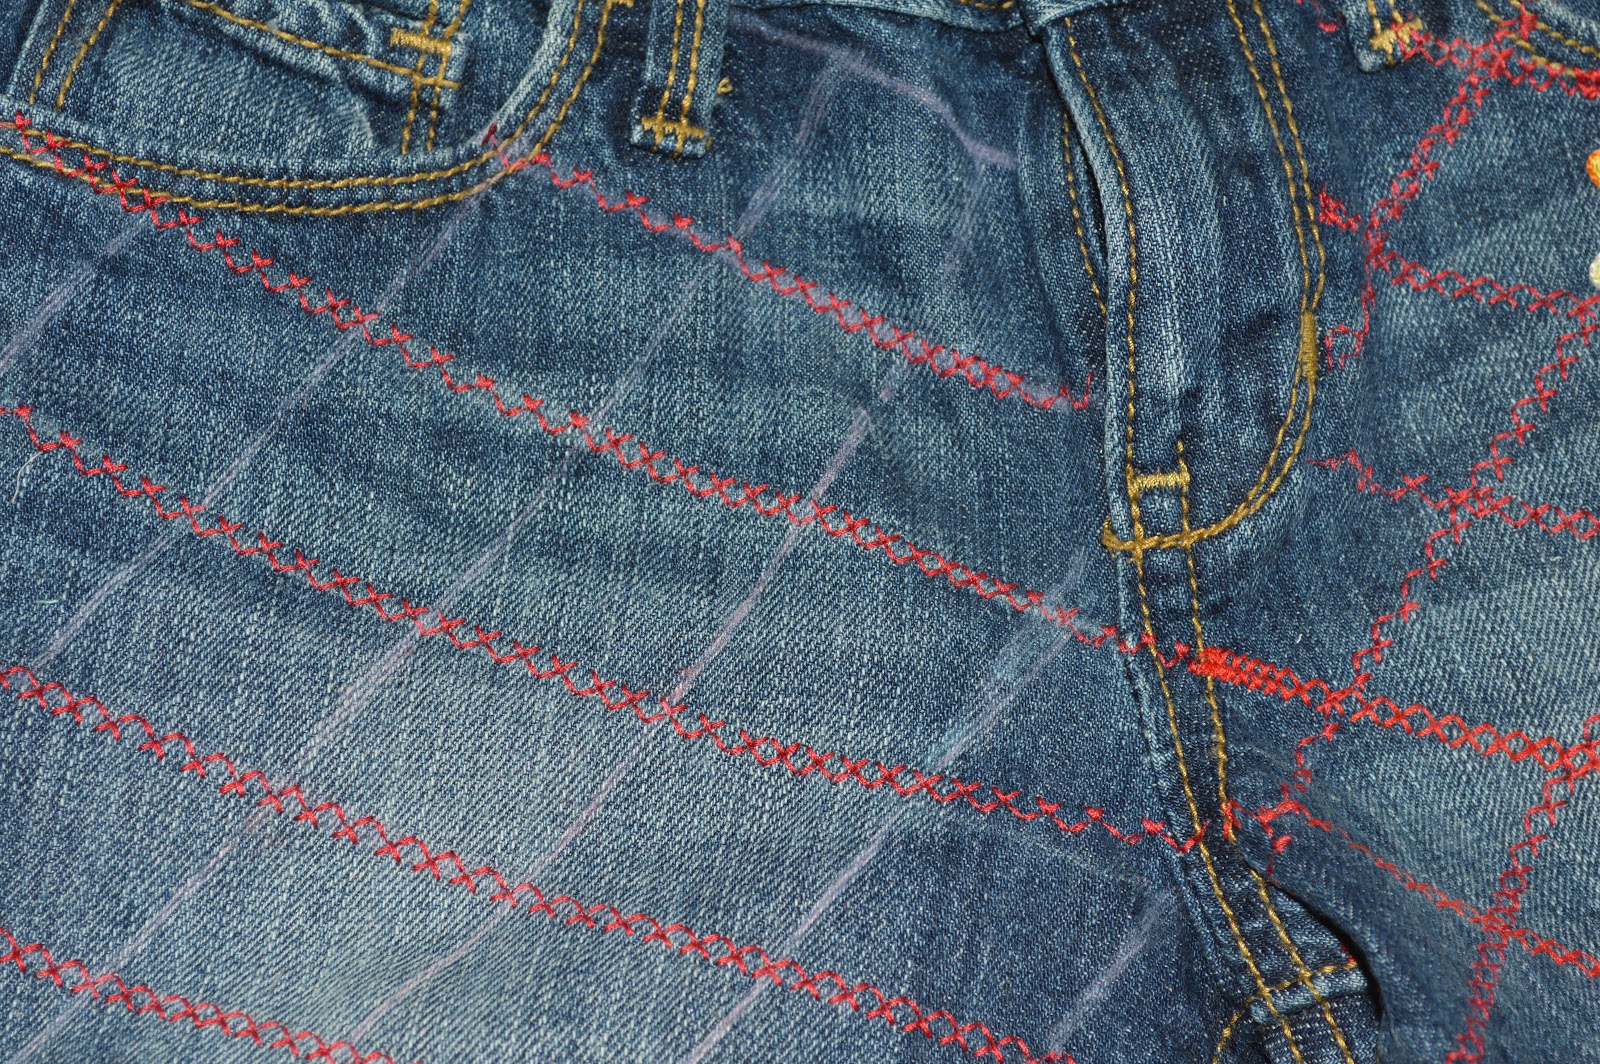 Sew Much To Give: Embellishing Jeans With Diagonal Stitching